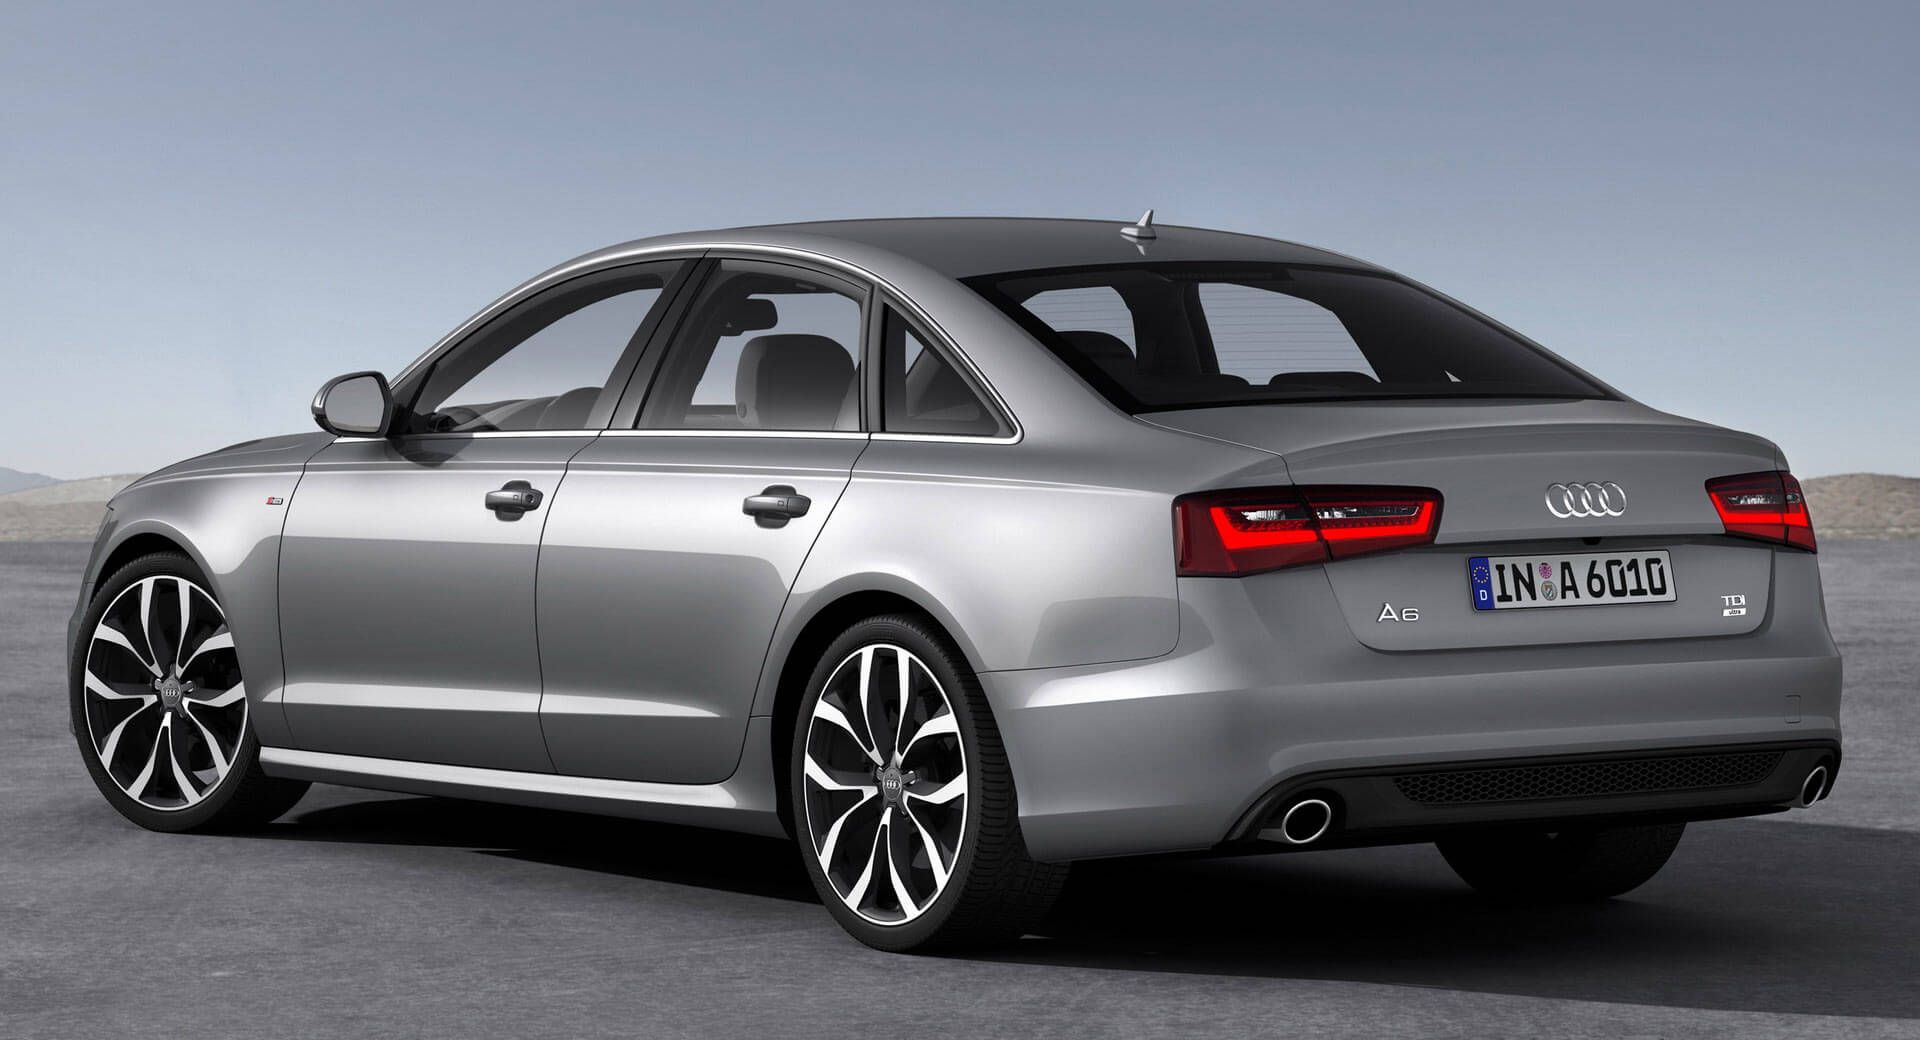 Audi A6 C7 And A7 Suspected Of AdBlue Tampering, Production Stops